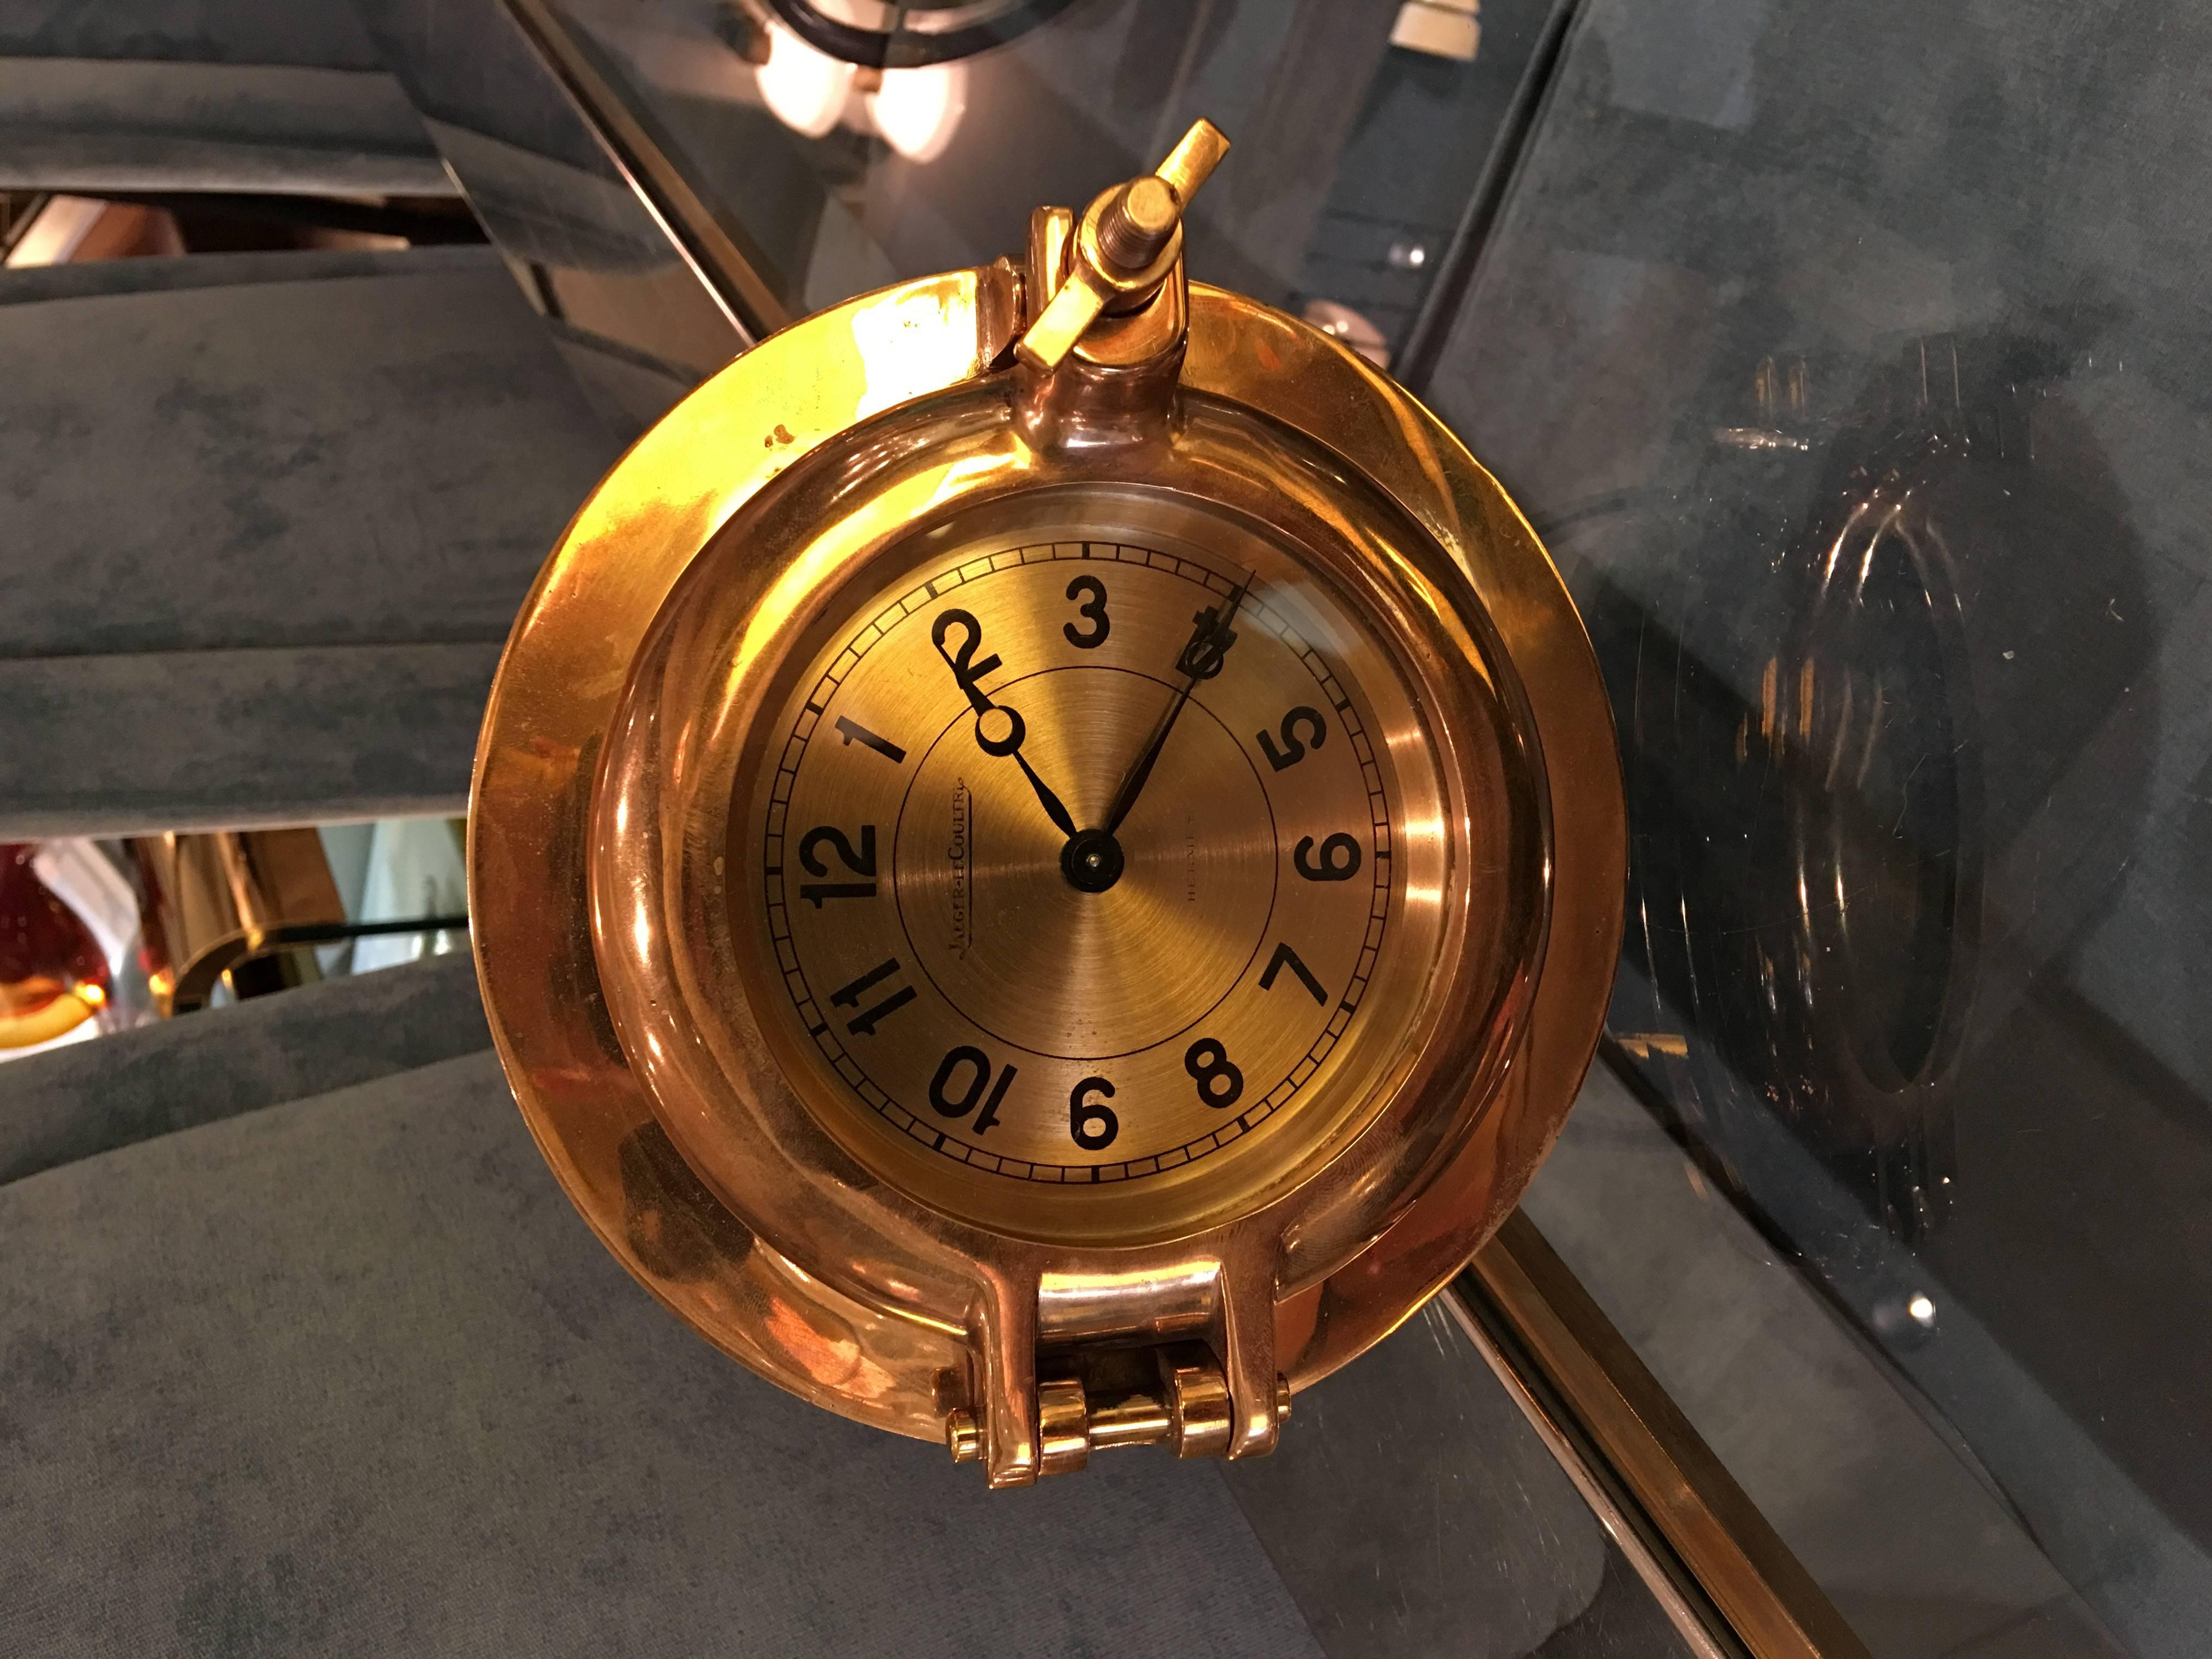 Brass Hermes Porthole Clock by Jaeger-LeCoultre For Sale